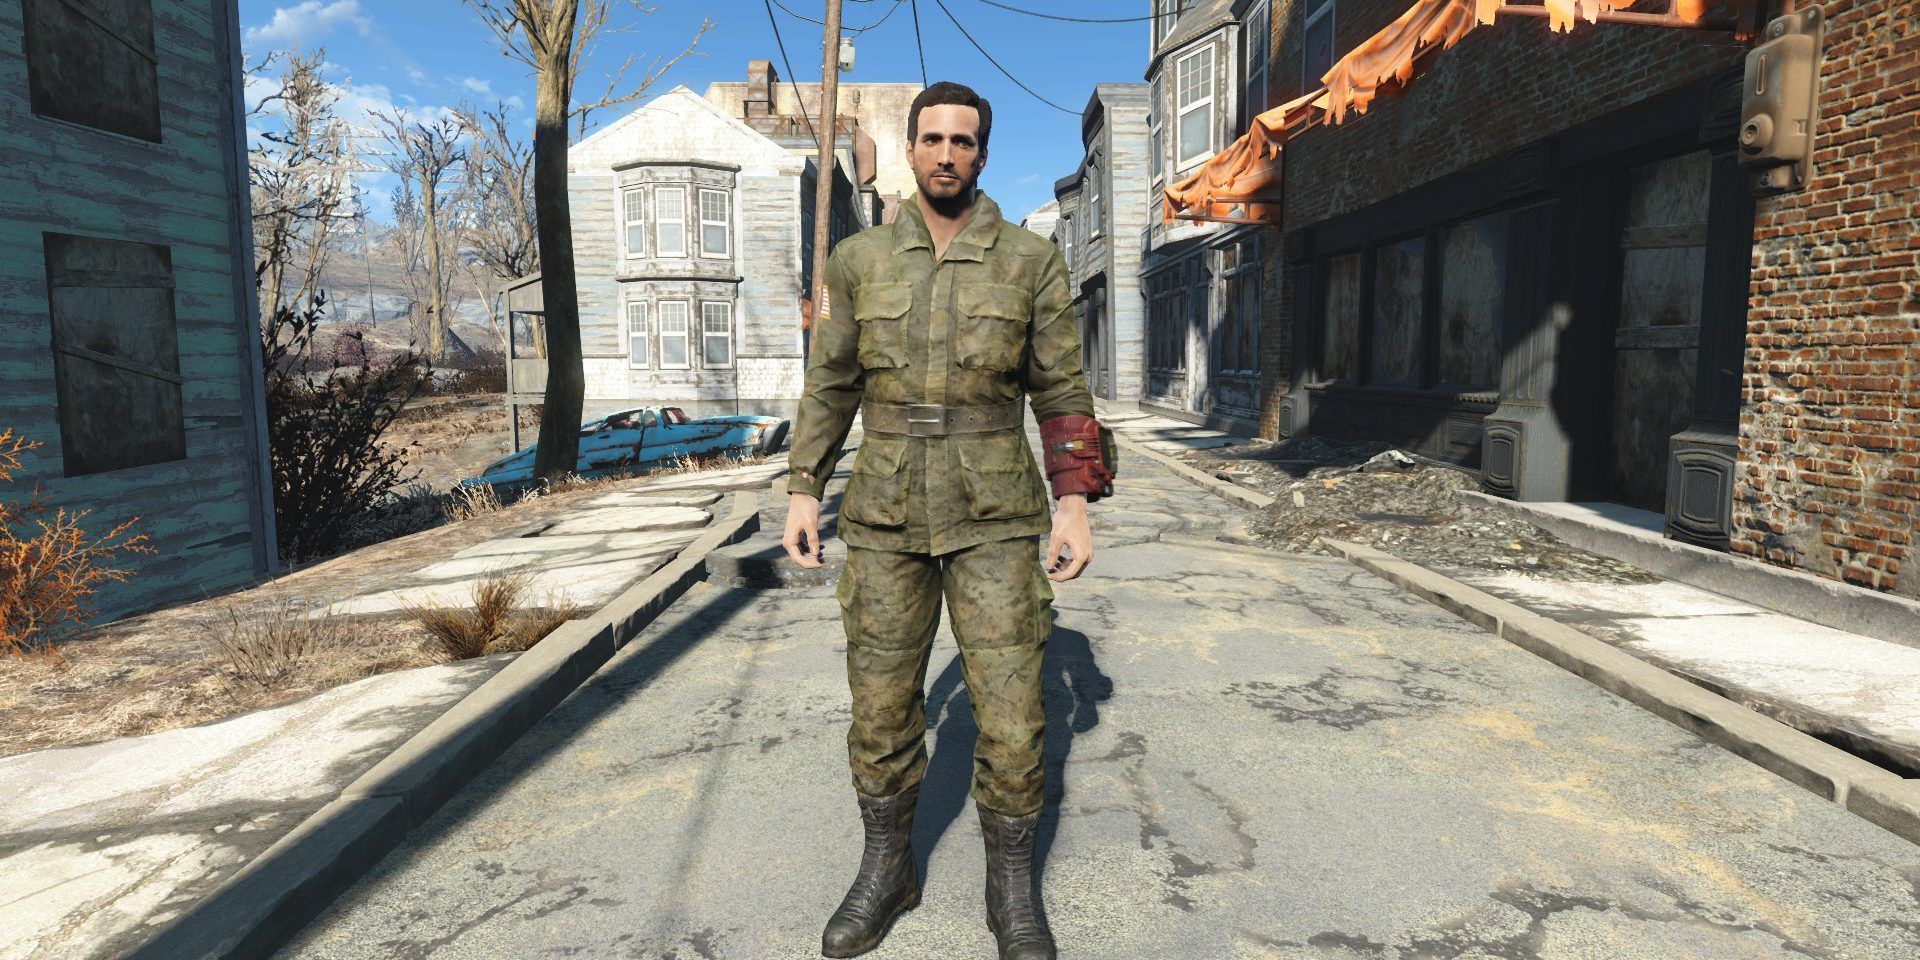 Player standing in the street wearing army fatigues in Fallout 4.